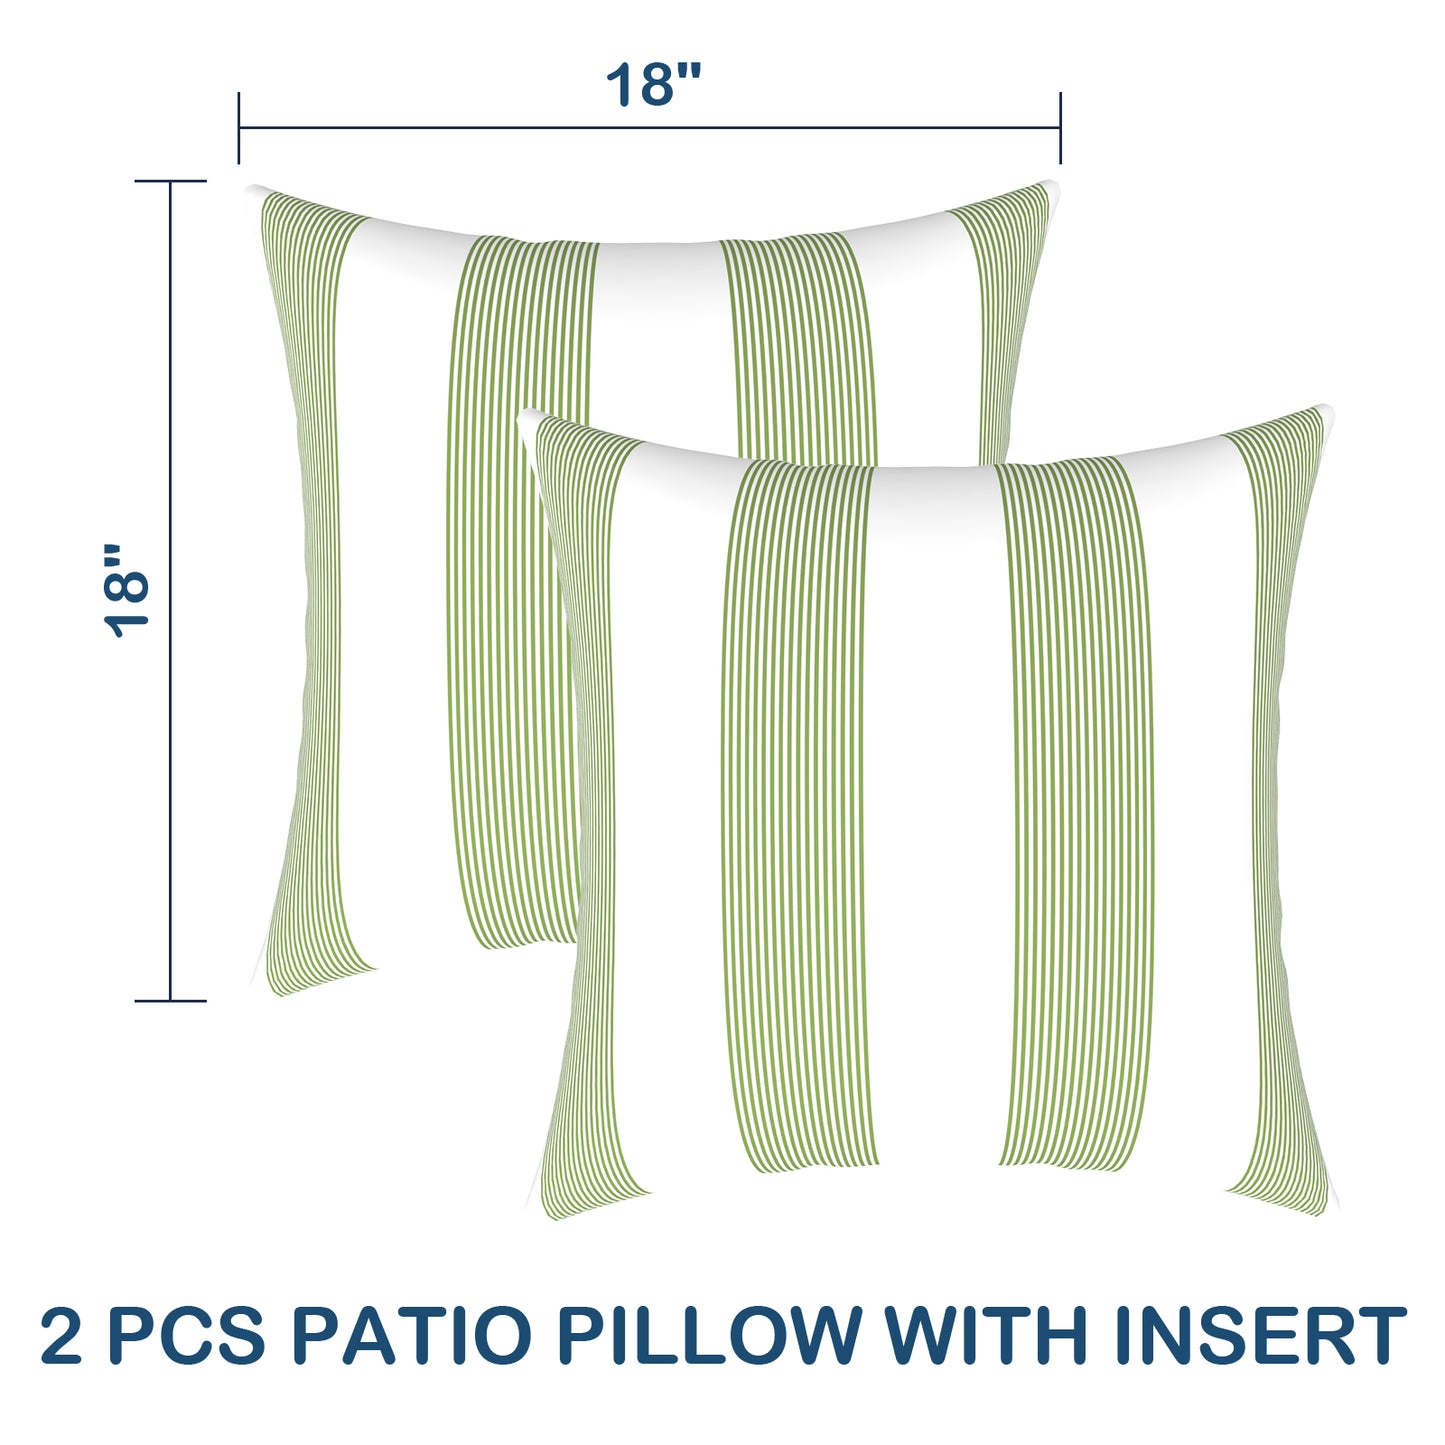 Melody Elephant Patio Throw Pillows with Inners, Fade Resistant Square Pillow Pack of 2, Decorative Garden Cushions for Home, 18x18 Inch, Stripe Cabana Green